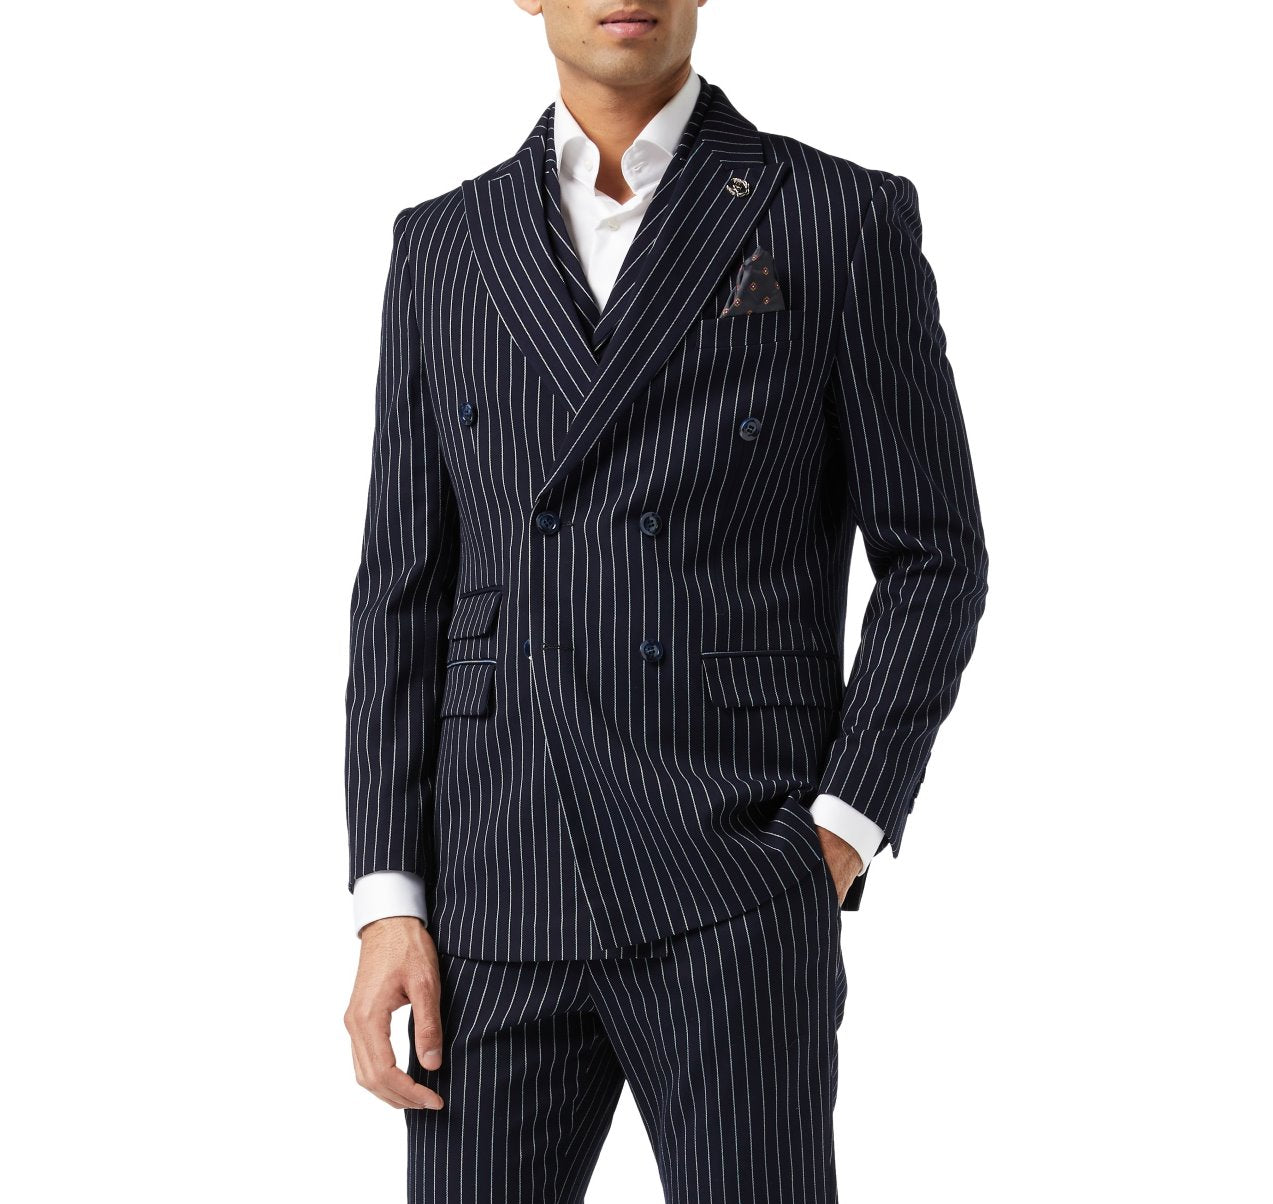 ALFRED – NAVY DOUBLE BREASTED PINSTRIPE BLAZER